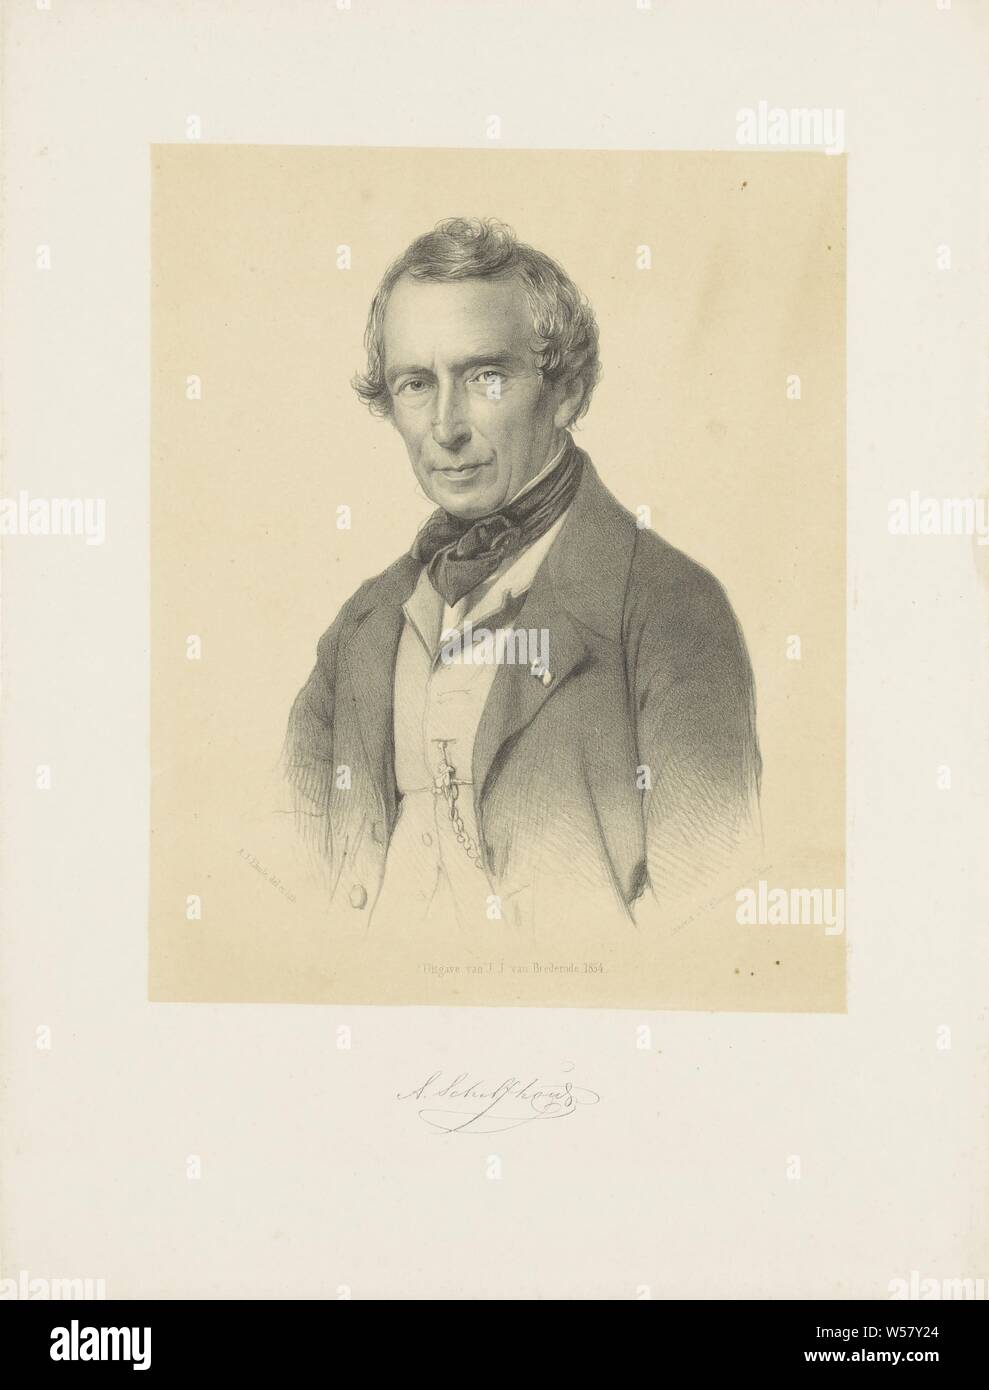 Portrait of Andreas Schelfhout, The person portrayed is wearing a bow tie, a watch chain on his vest and a knightly order on the lapel of his jacket. Under the portrait are signature., Historical persons ((full) bust portrait), knighthood order, Andreas Schelfhout, Adrianus Johannes Ehnle (mentioned on object), 1854, paper, h 362 mm × w 275 mm Stock Photo